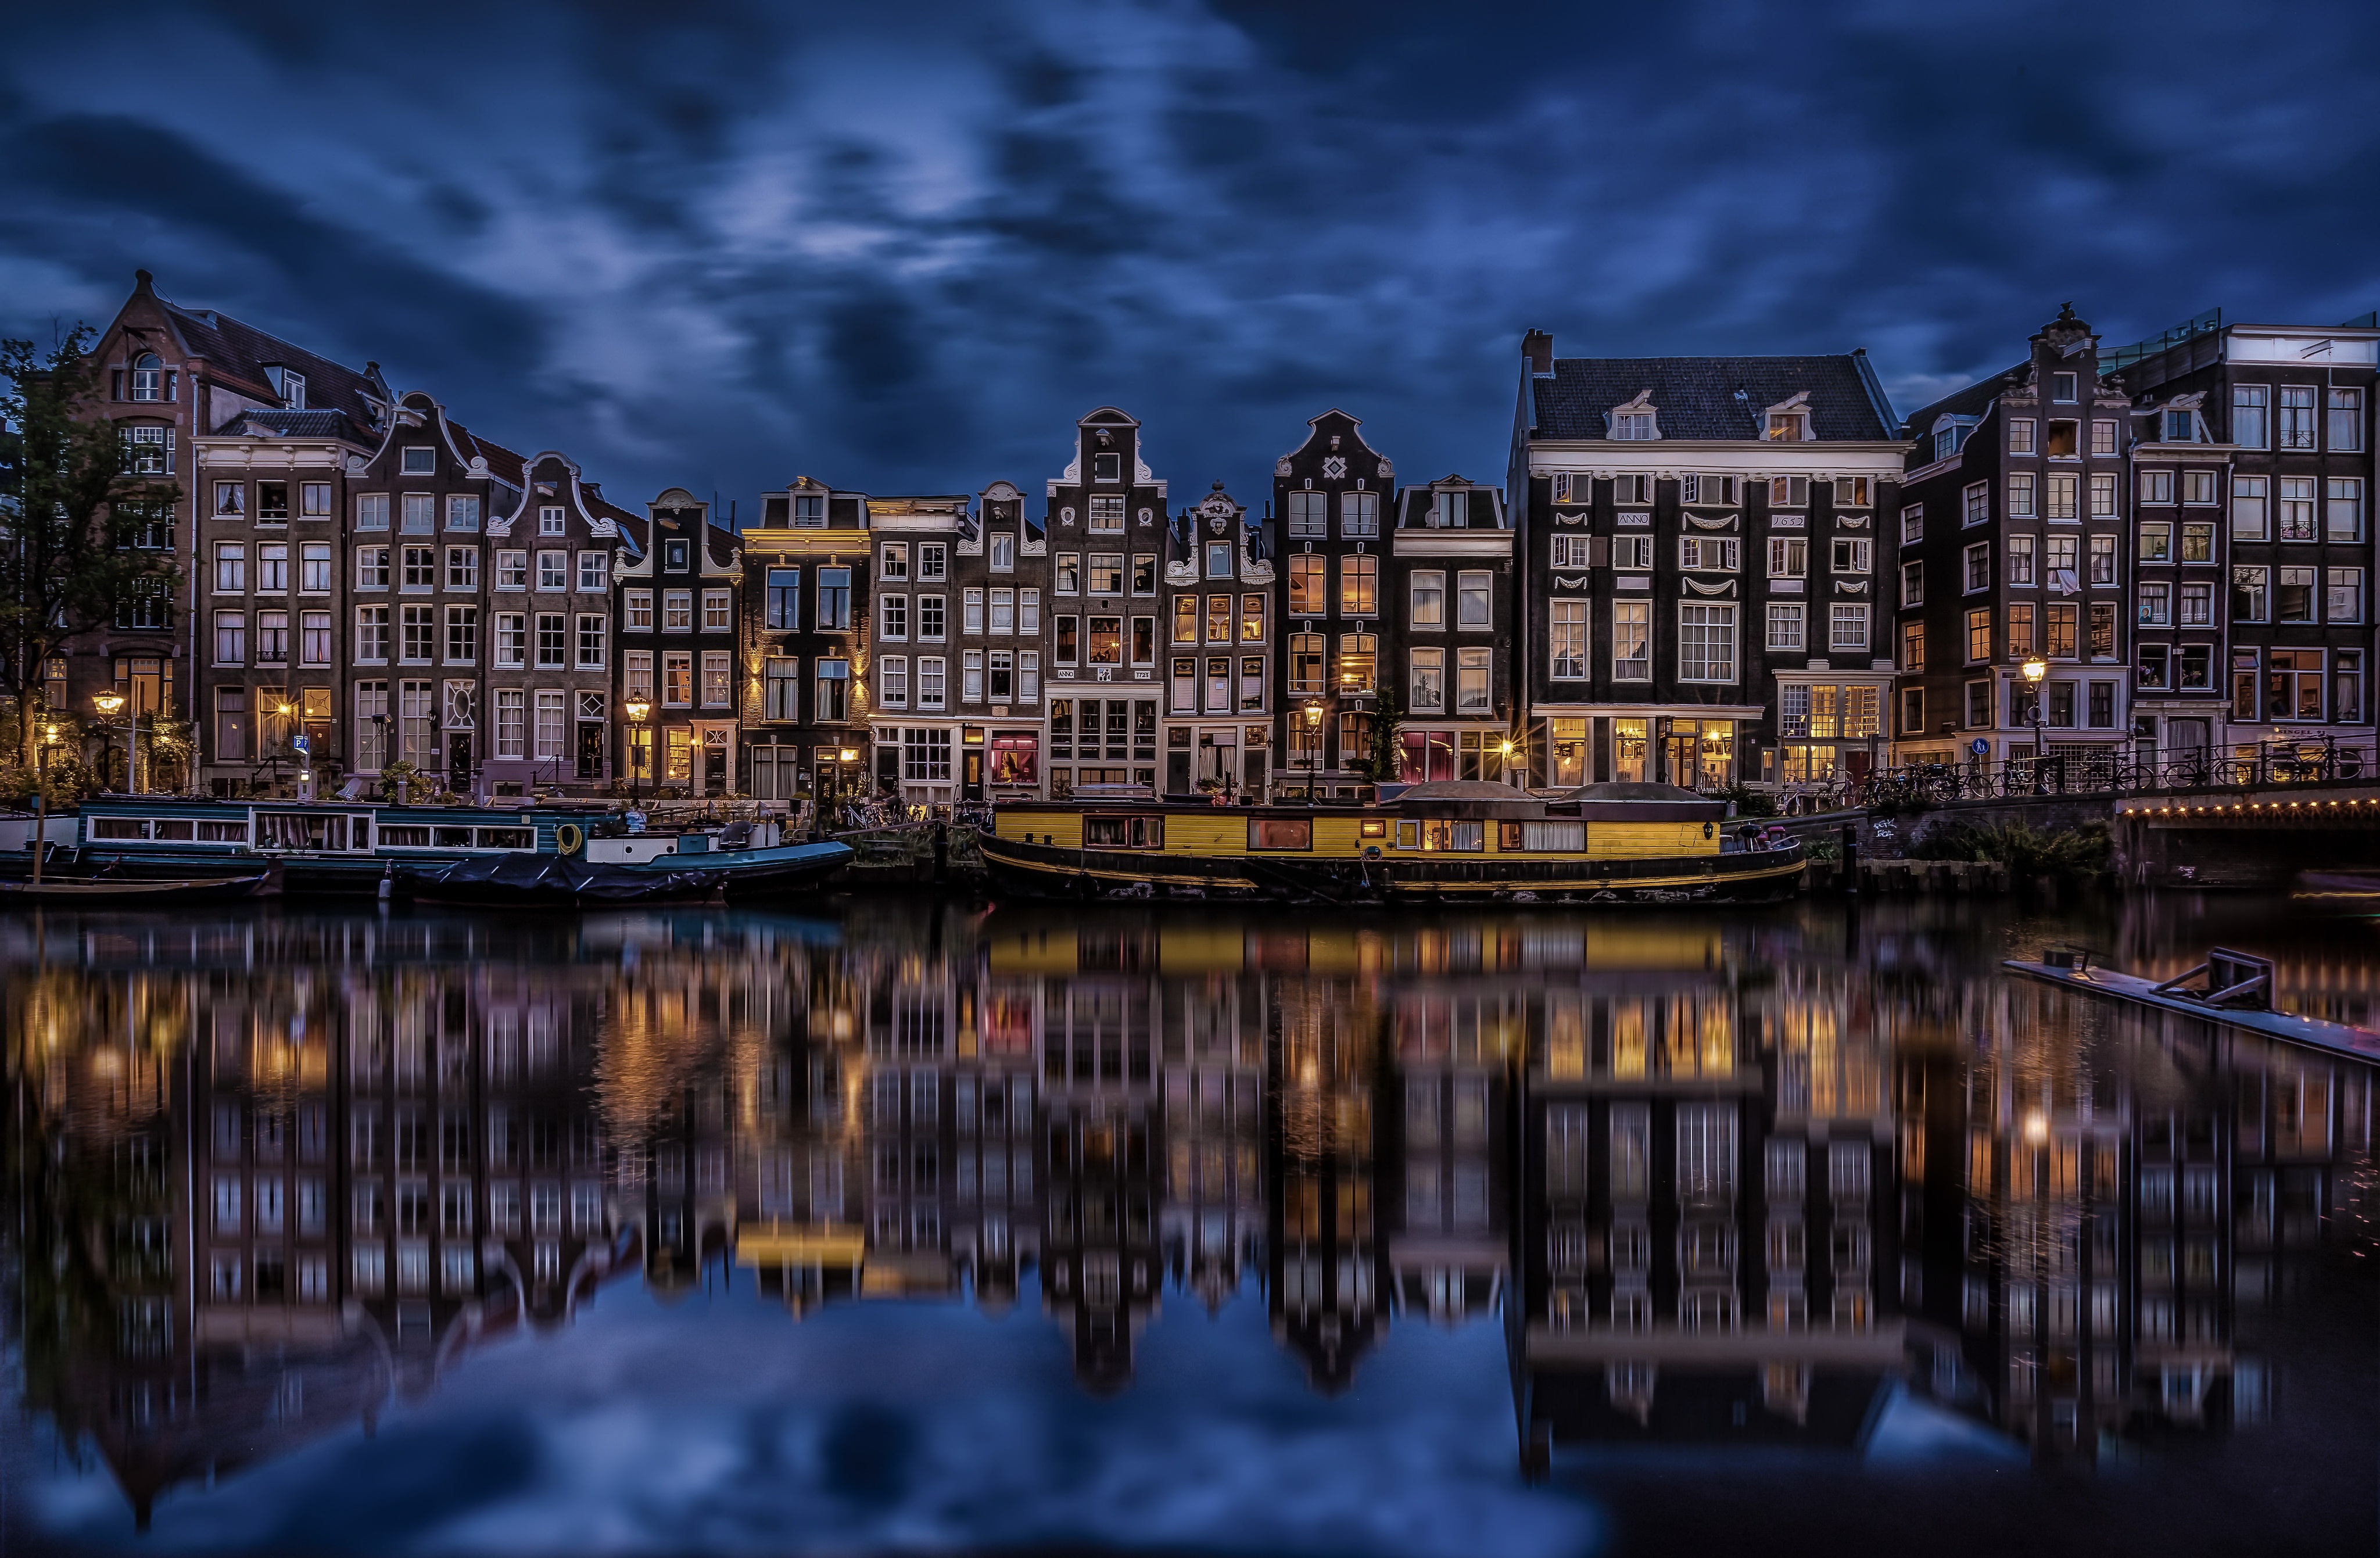 amsterdam, netherlands, house, reflection, man made, boat, canal, light, night, cities